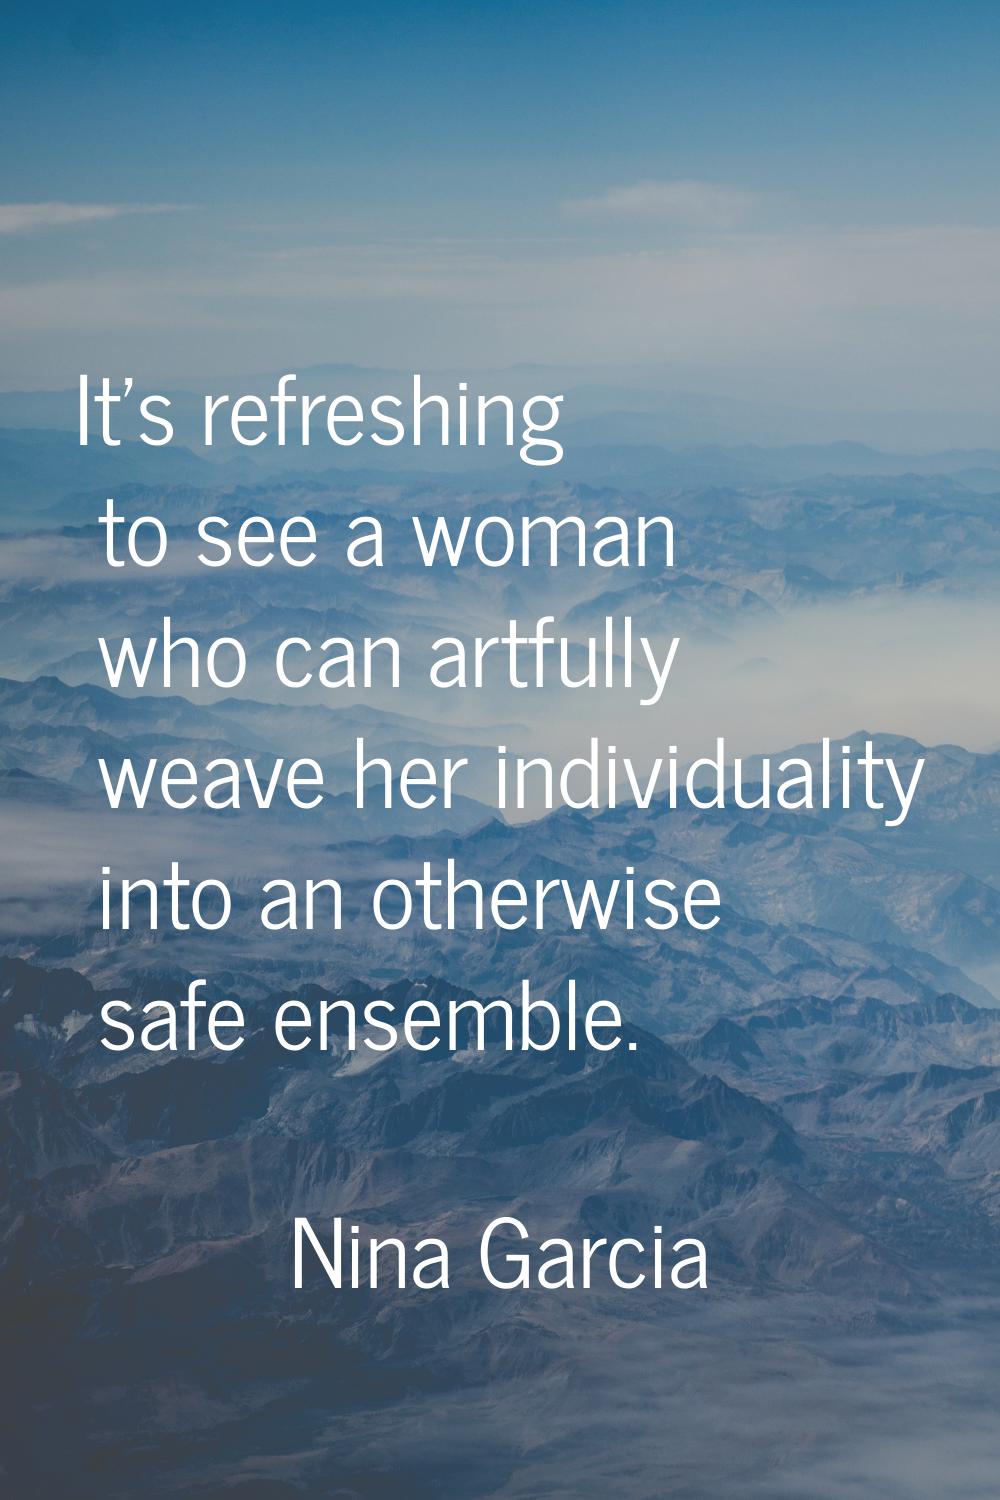 It's refreshing to see a woman who can artfully weave her individuality into an otherwise safe ense